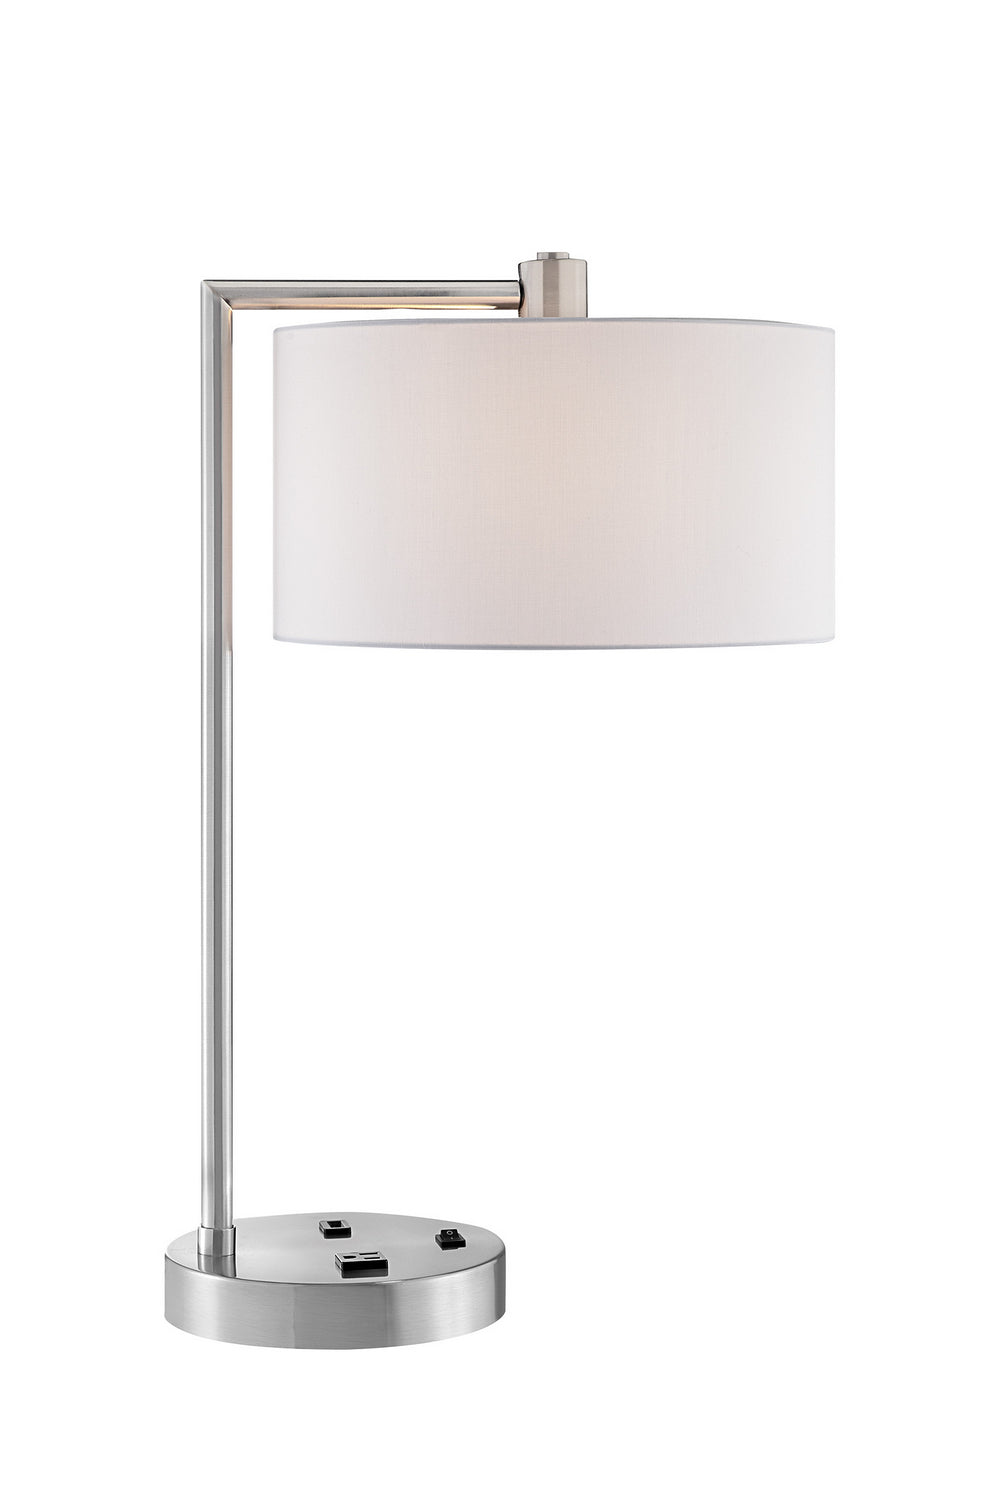 Lexiana Table Lamp in Brushed Nickel with White Fabric Shade, Outletx1 & Usbx1, E27 A 60W